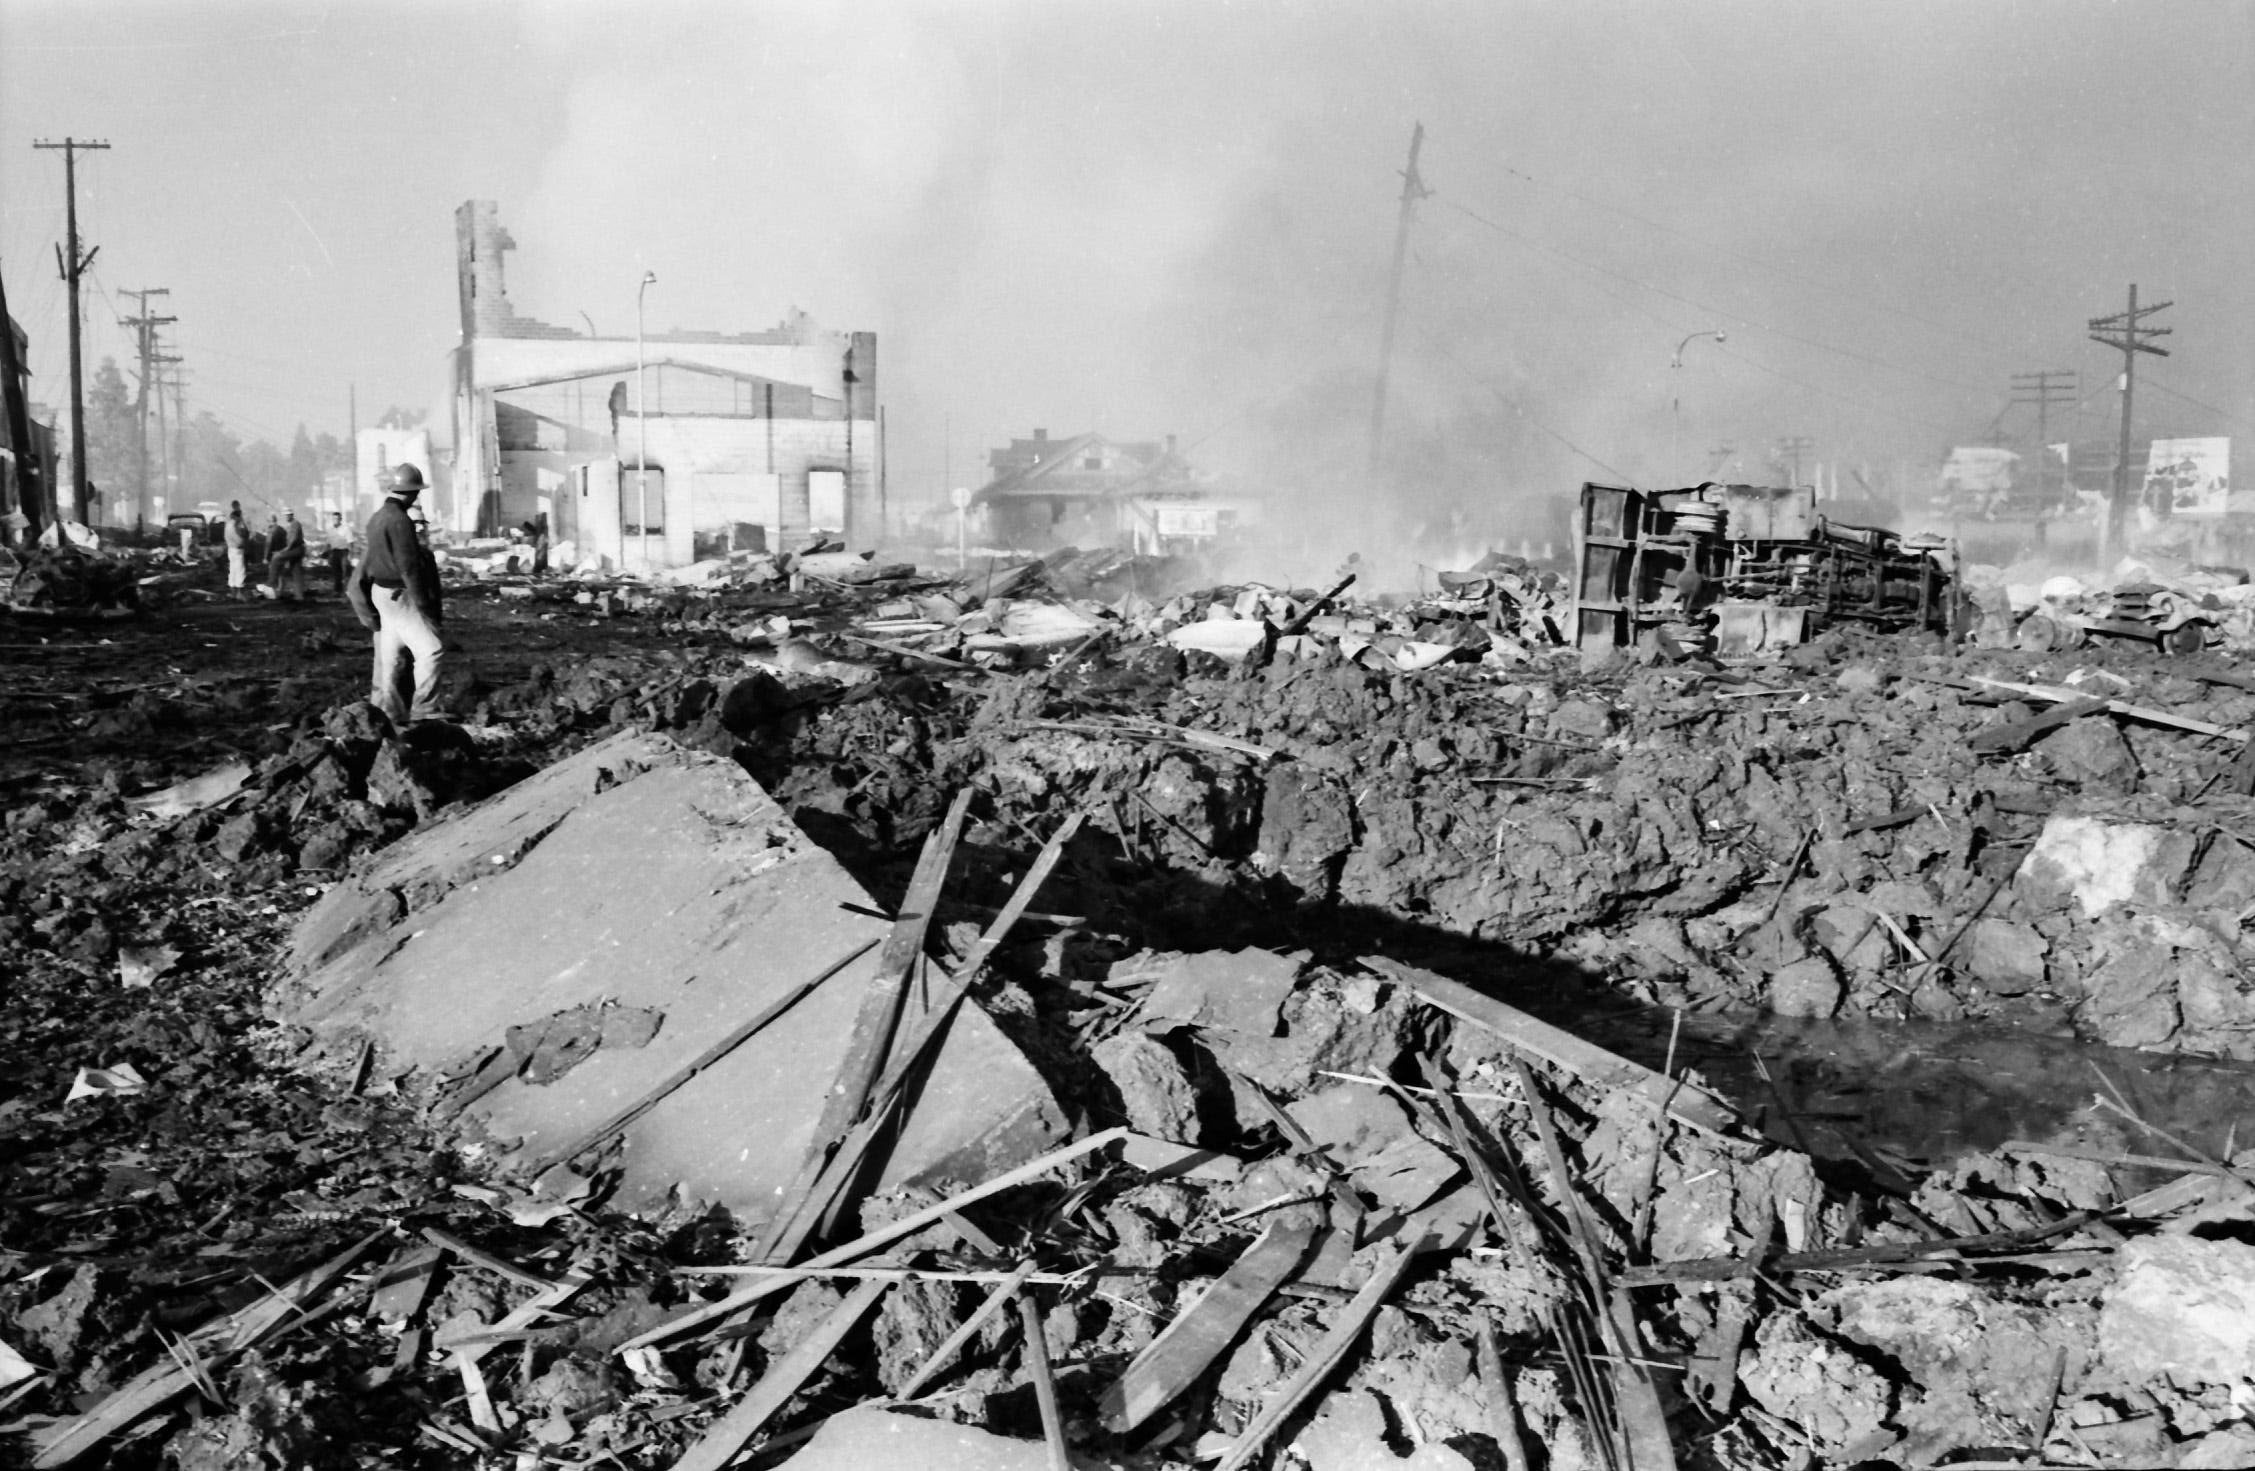 Looking Back at "The Blast" that devastated downtown Roseburg in 1959